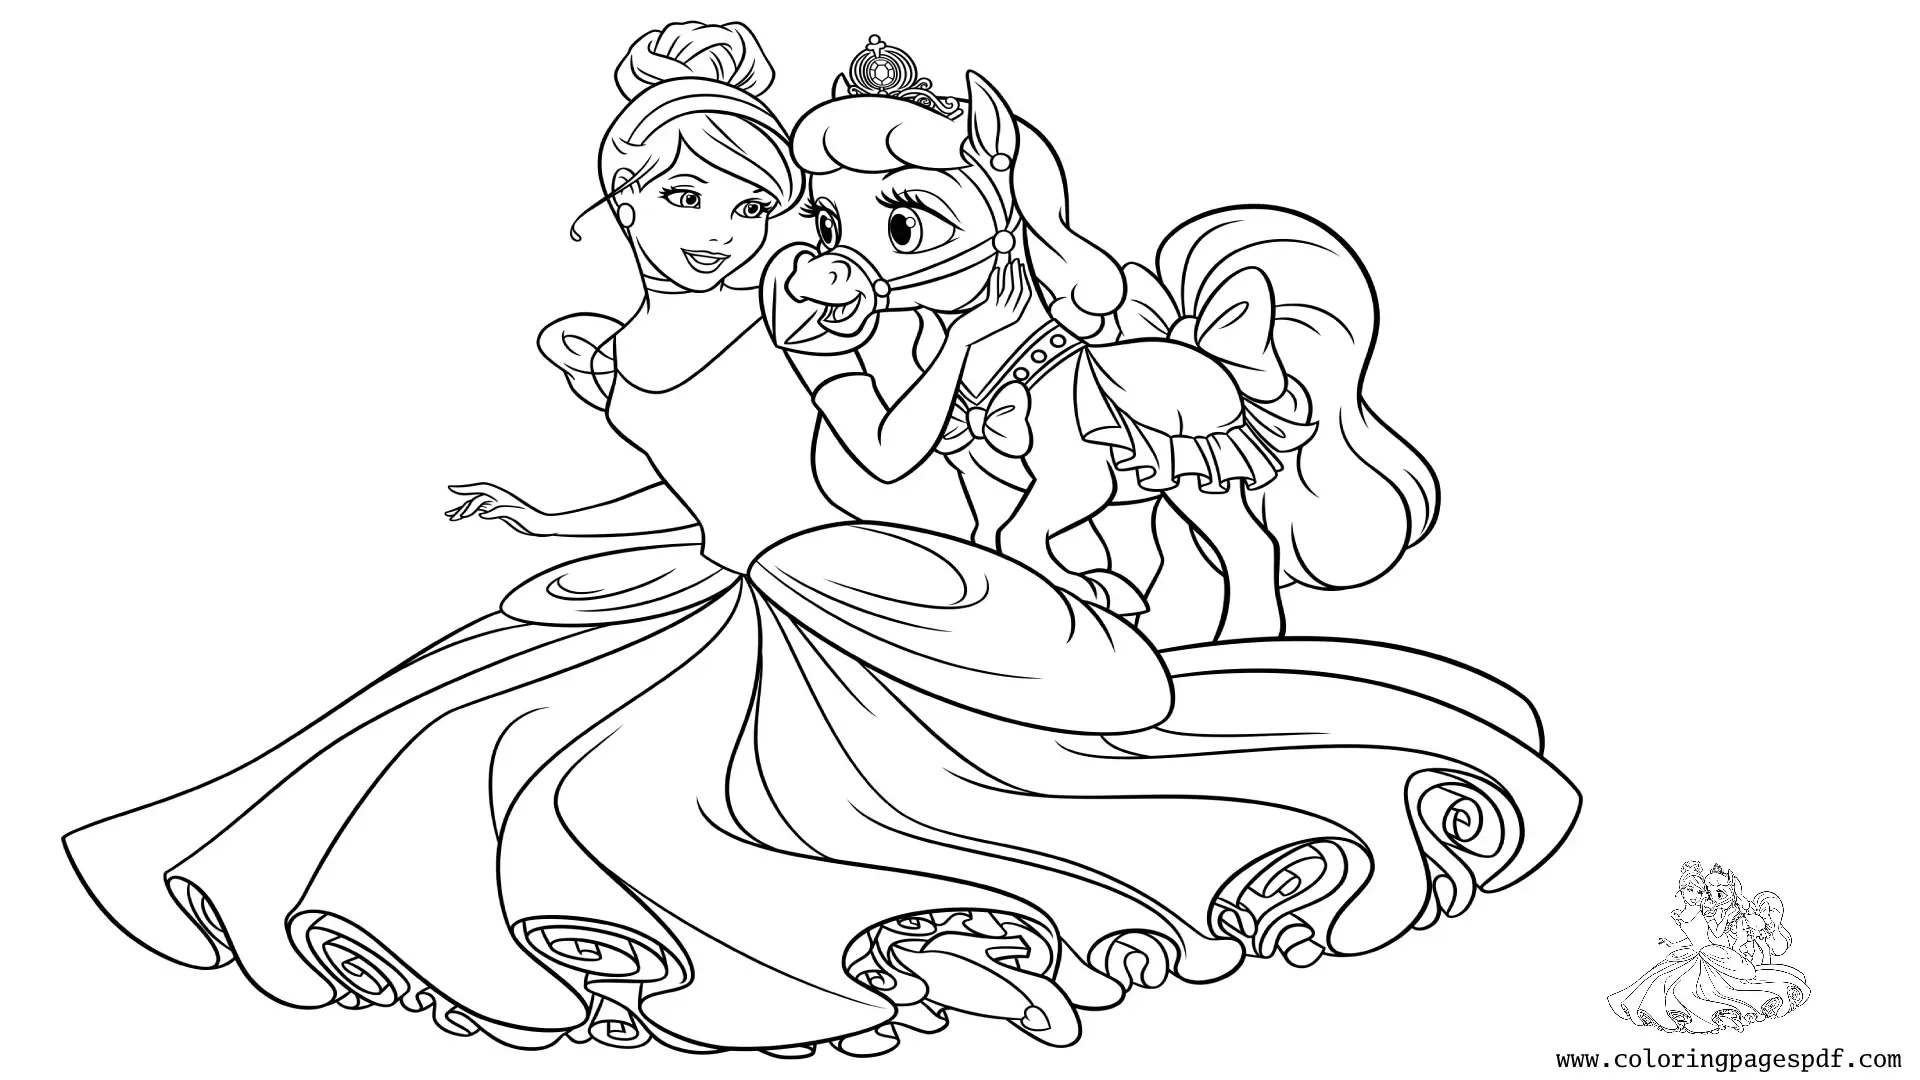 Coloring Page Of A Princess With A Cute Pony